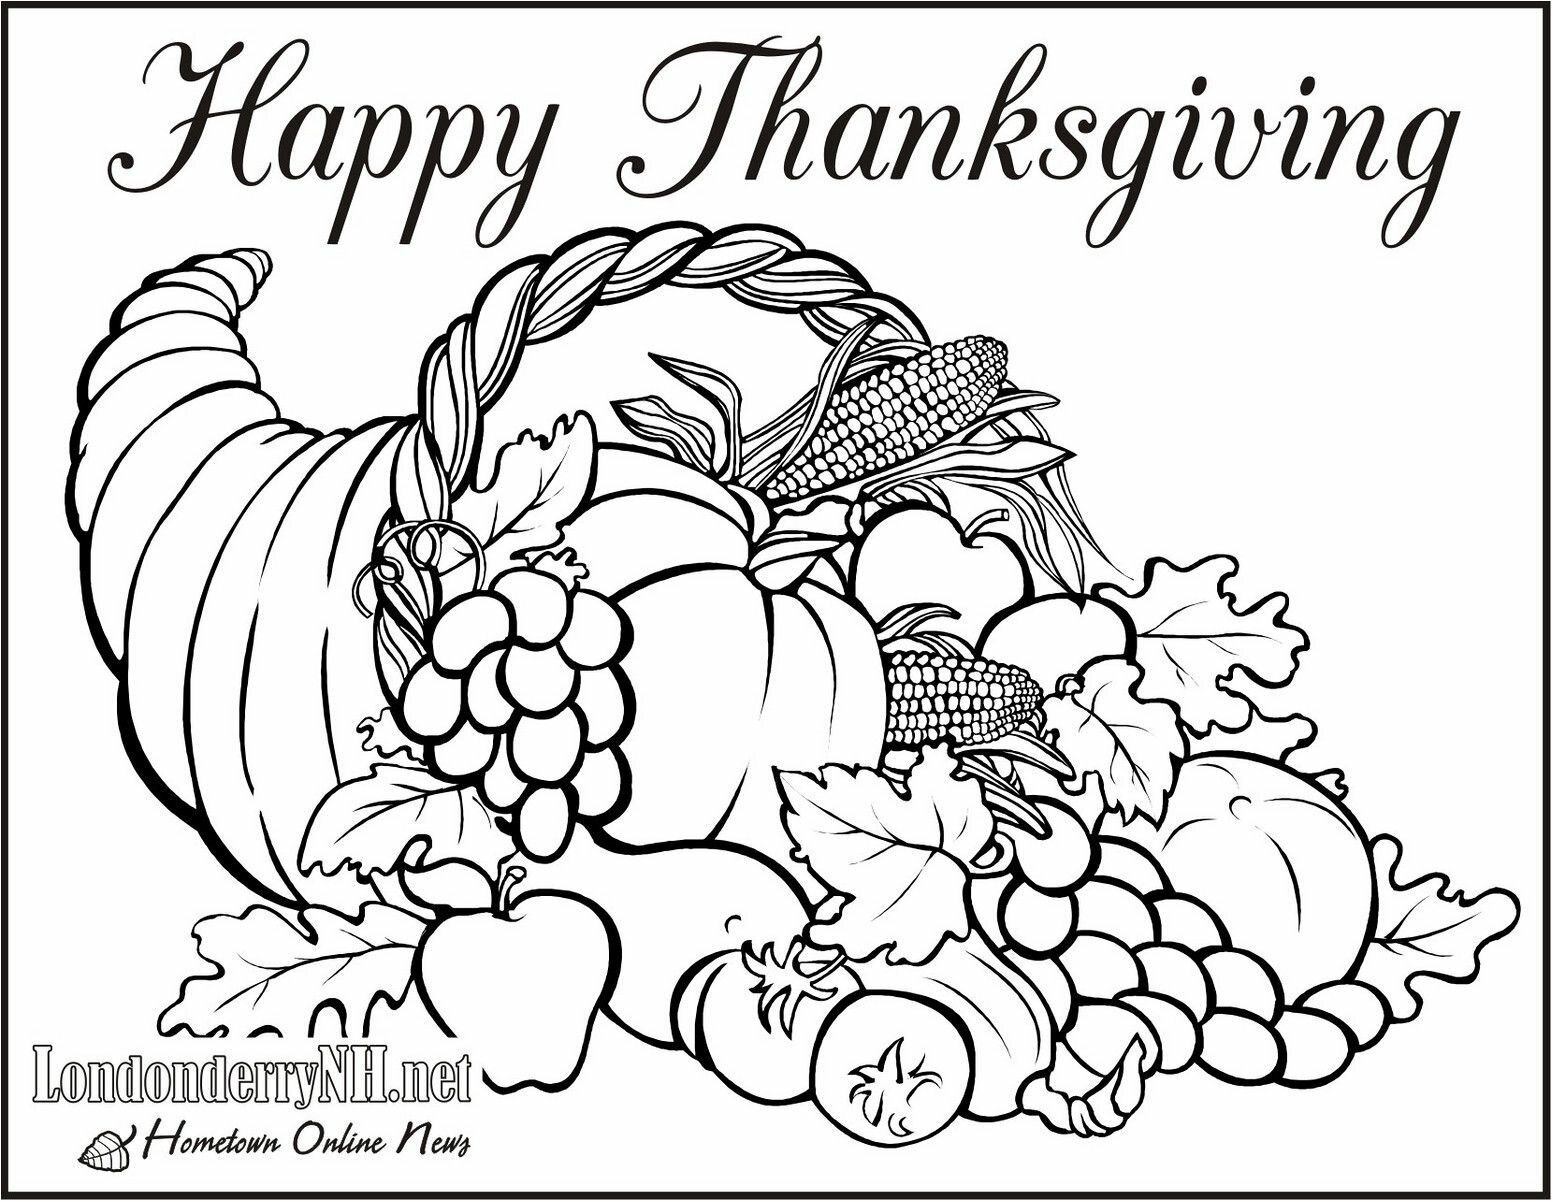 delightful thanksgiving coloring pages library delightful picture free coloring pages for thanksgiving day 